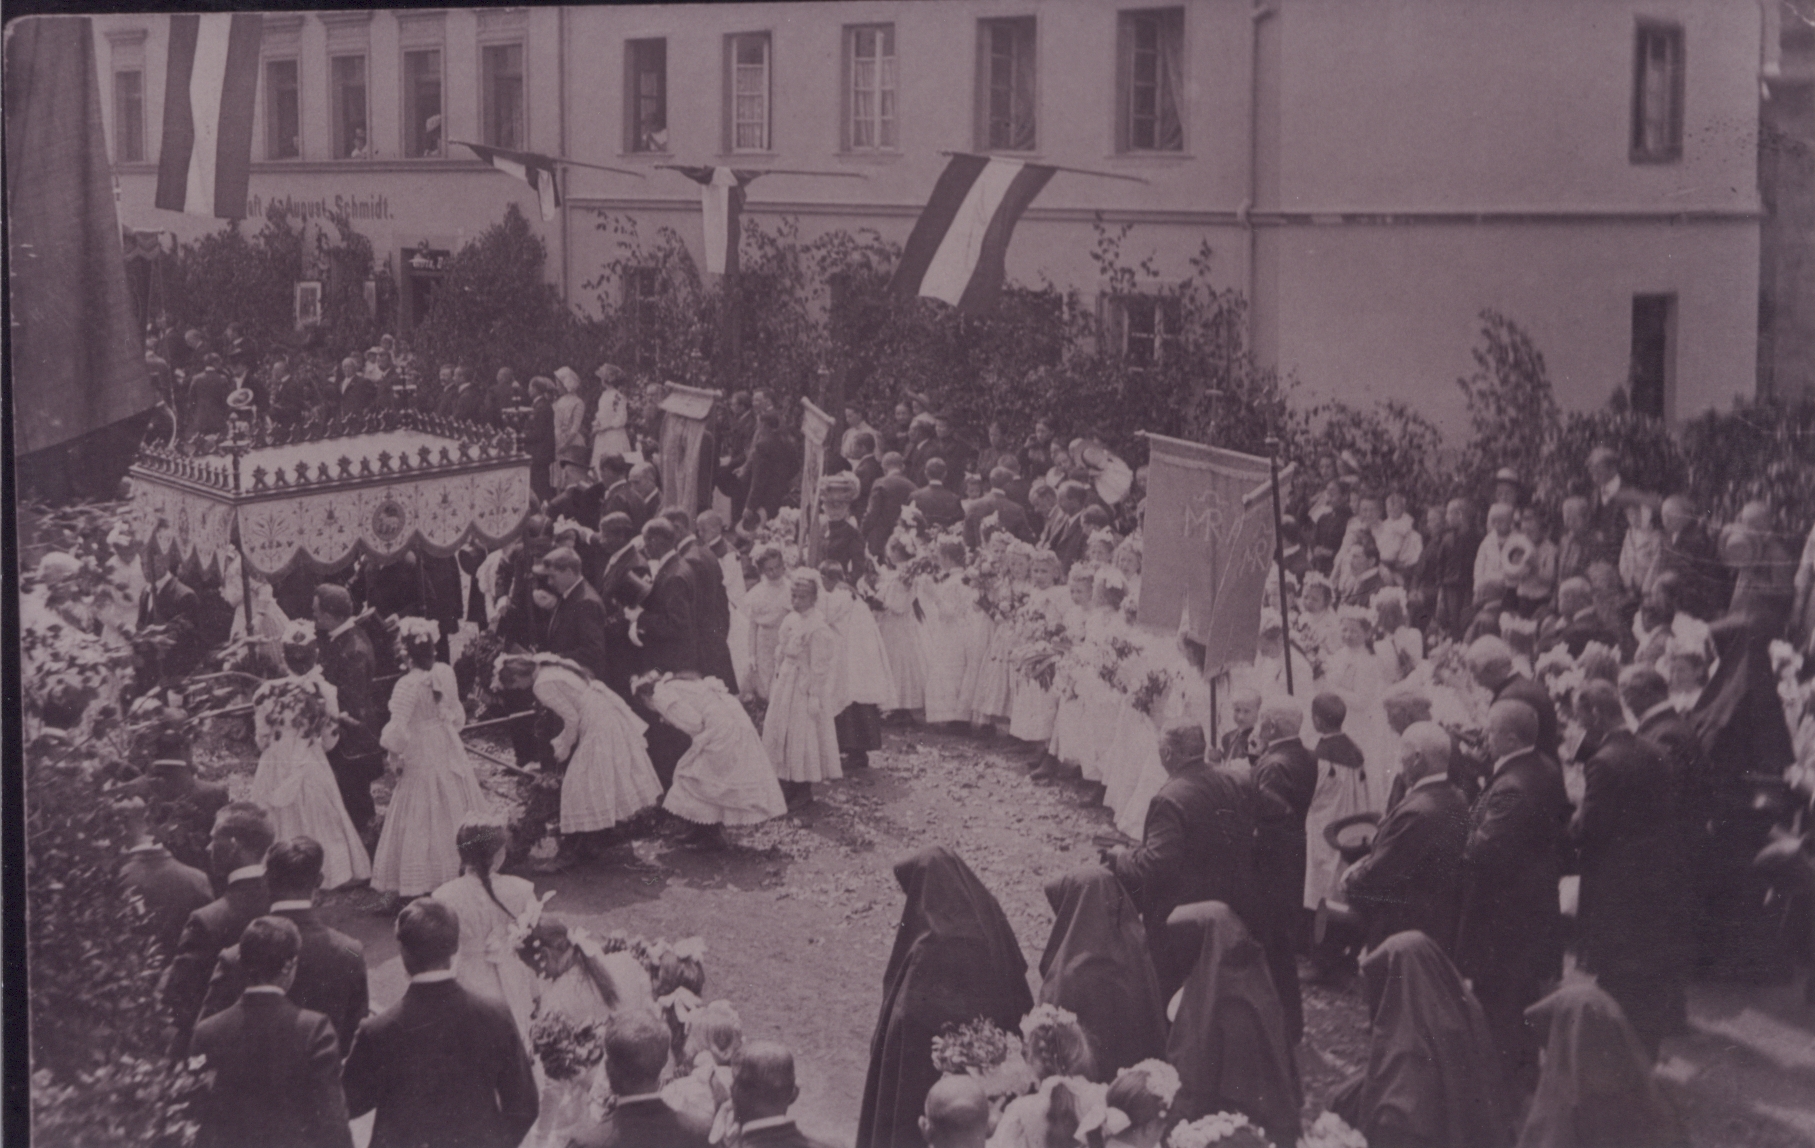 Fronleichnamsprozession in Bendorf um 1925 (REM CC BY-NC-SA)